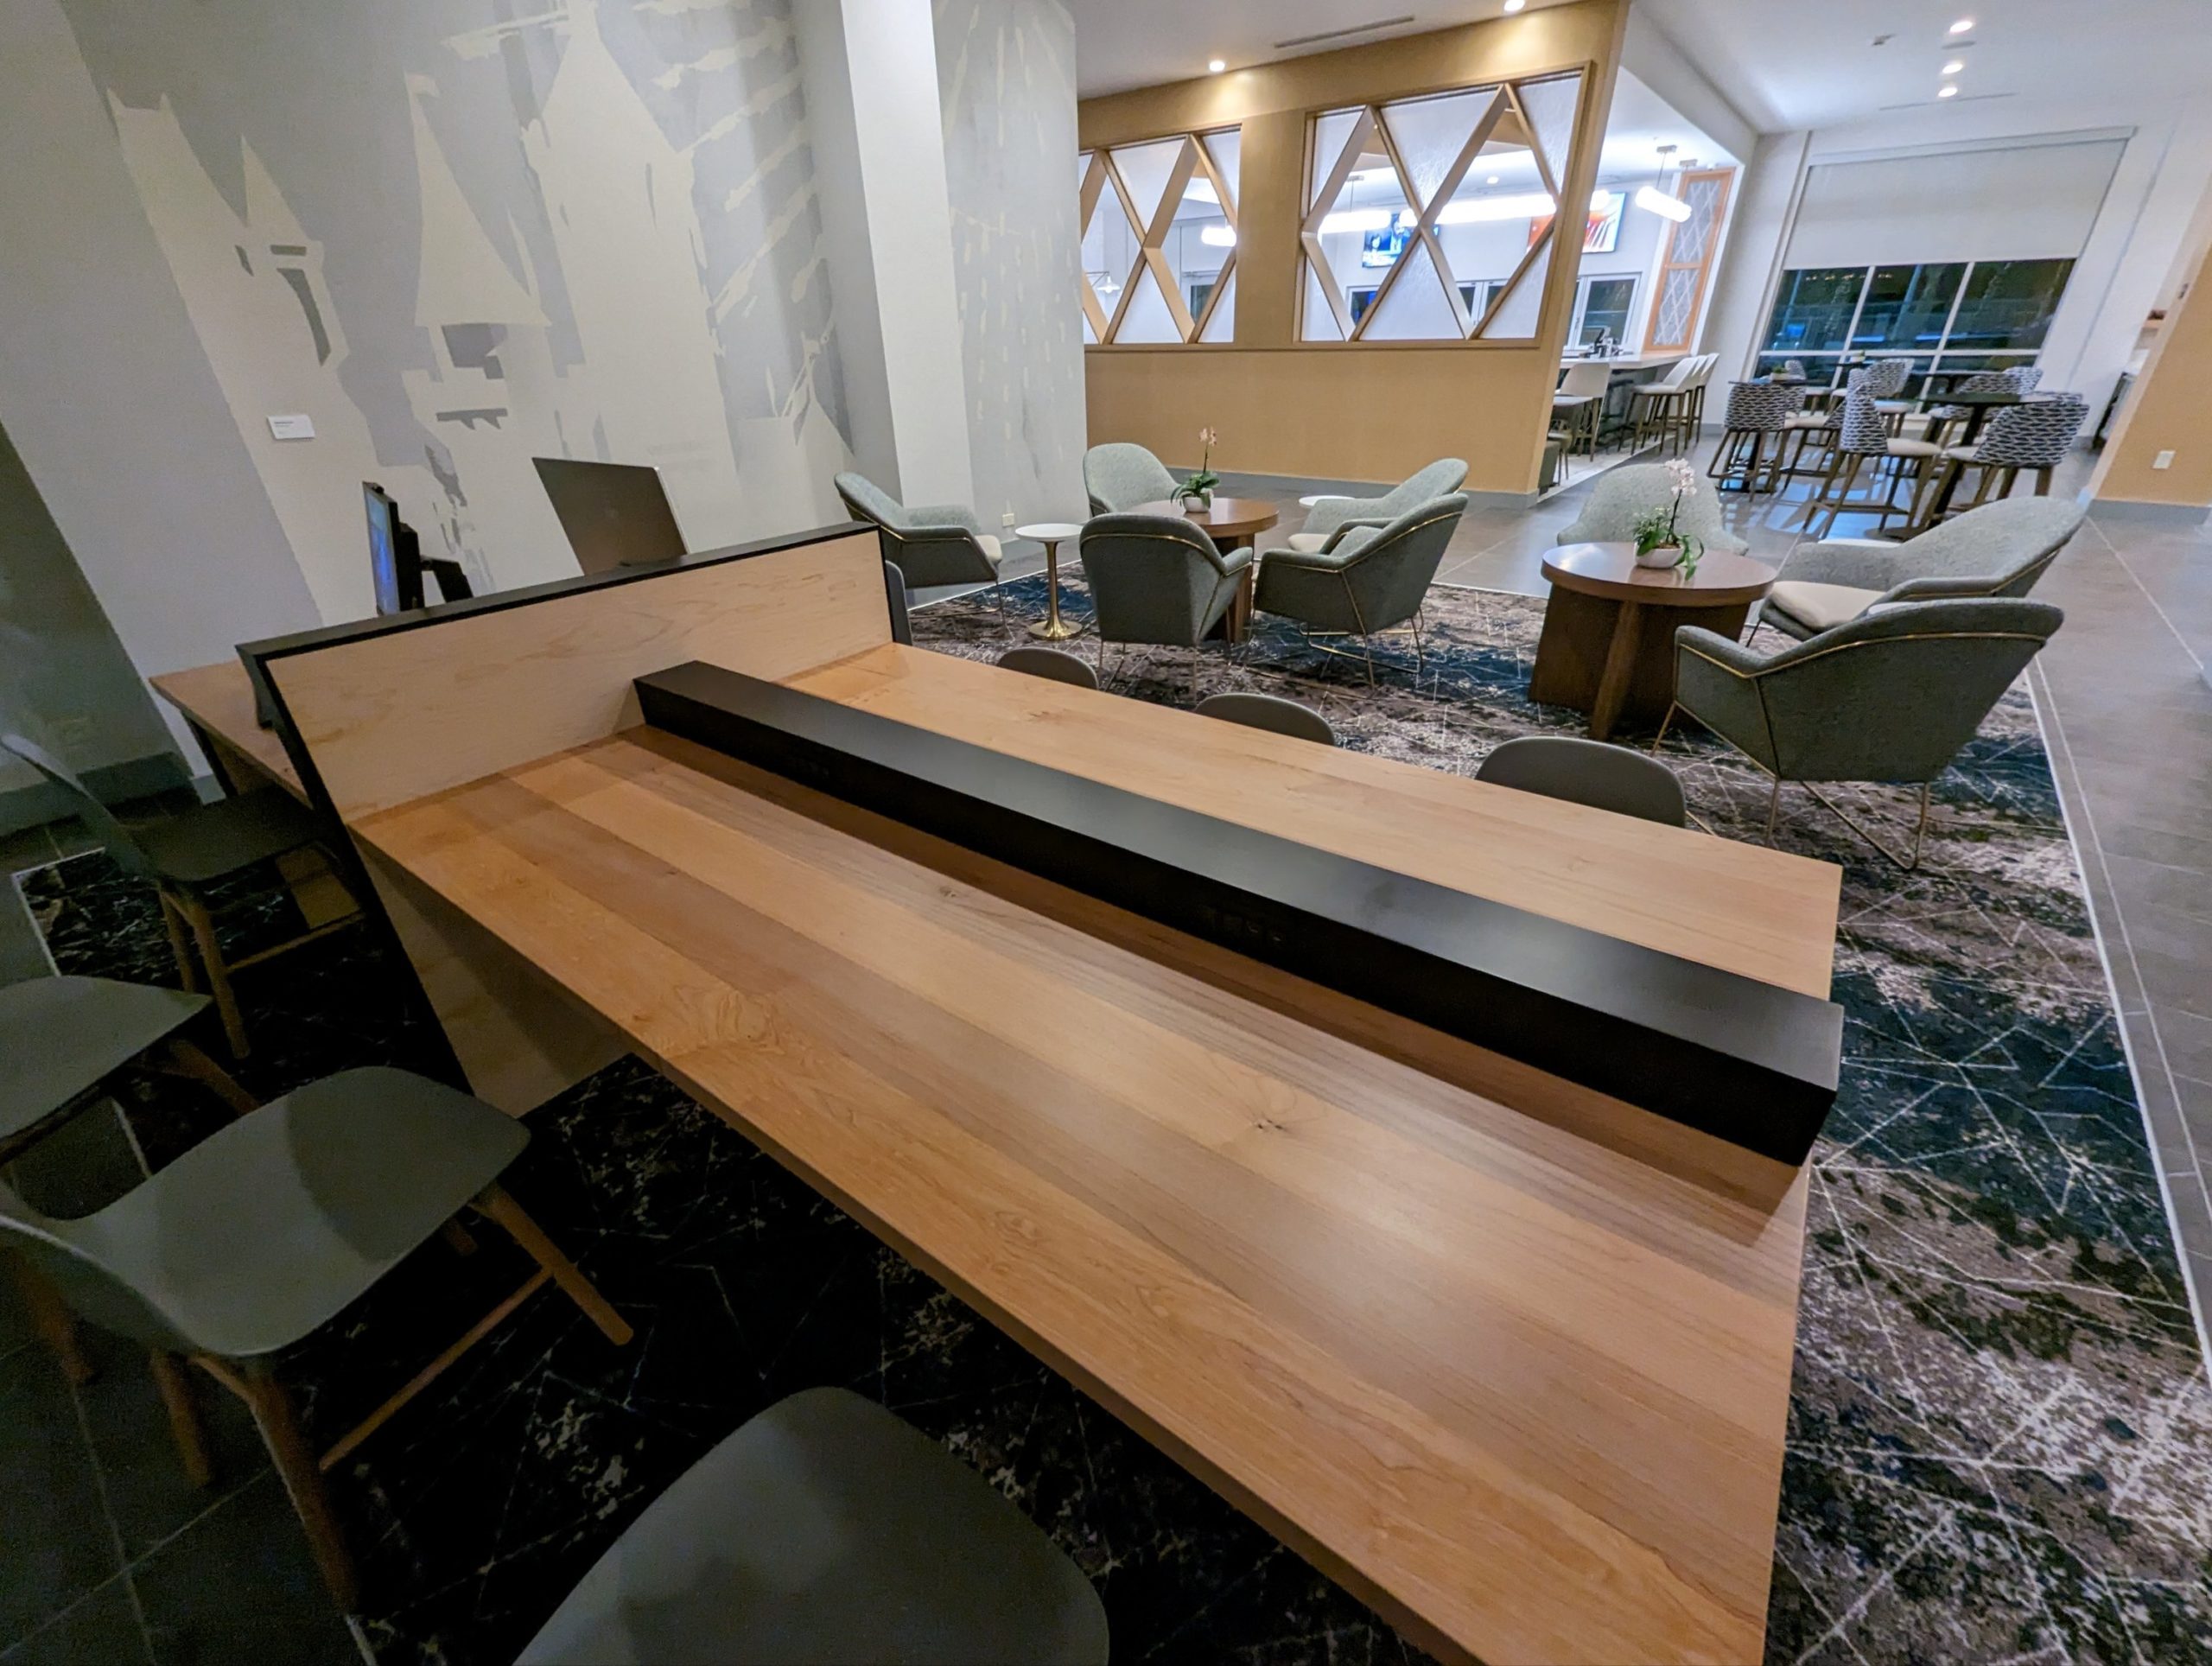 a long wooden table with a long rectangular object on it